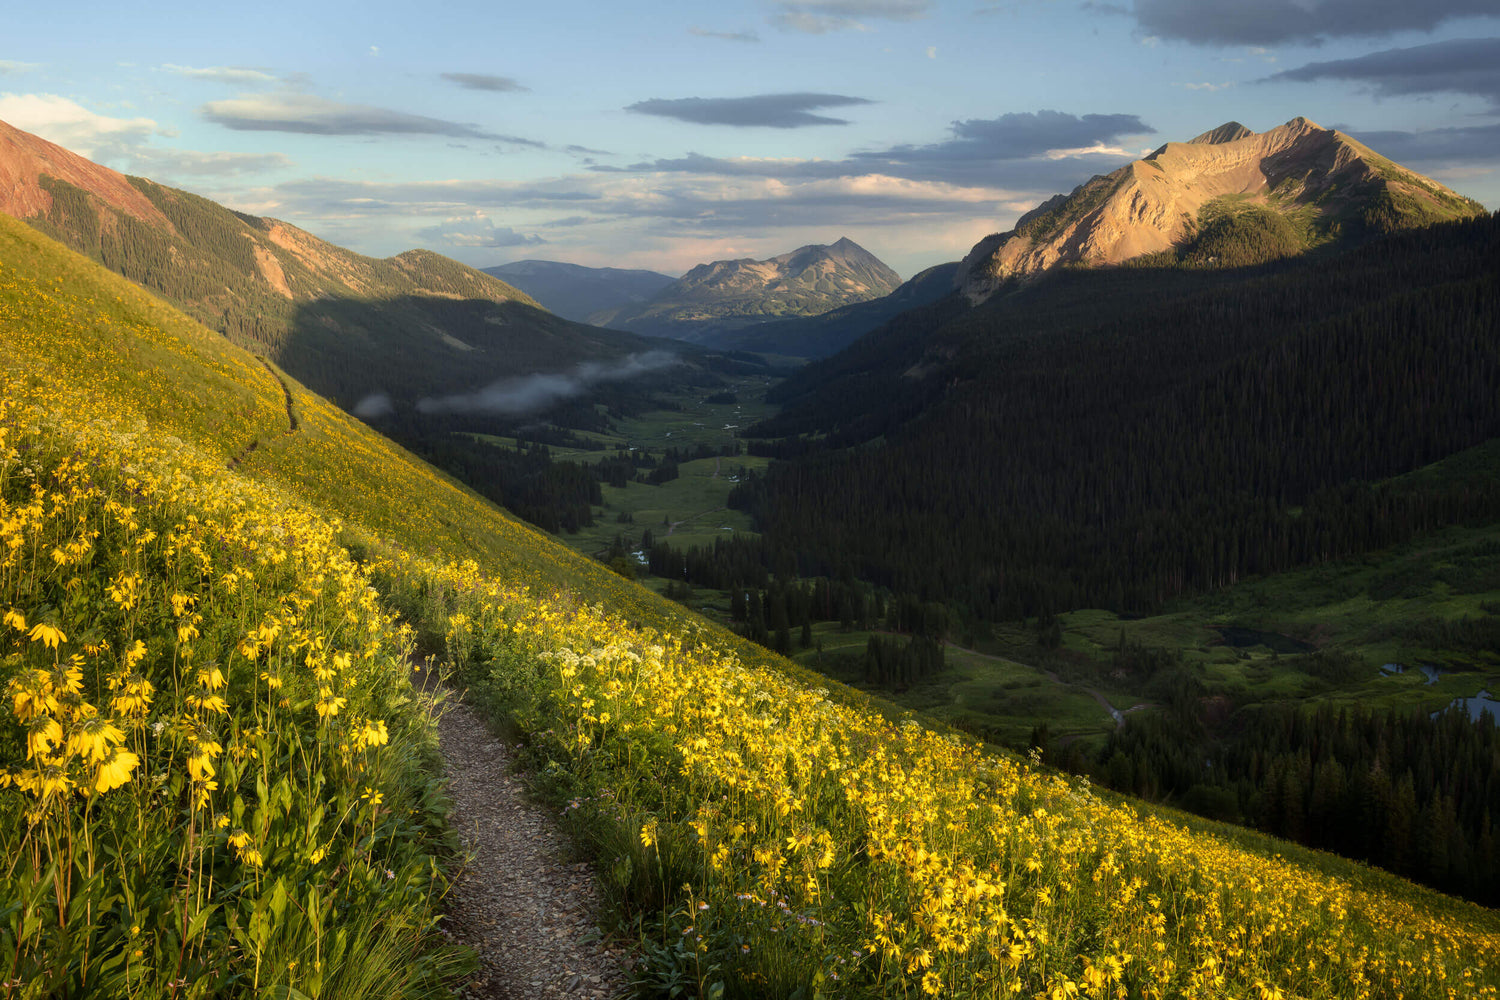 A Crested Butte wildflower picture from the 401 mountainbike trail.